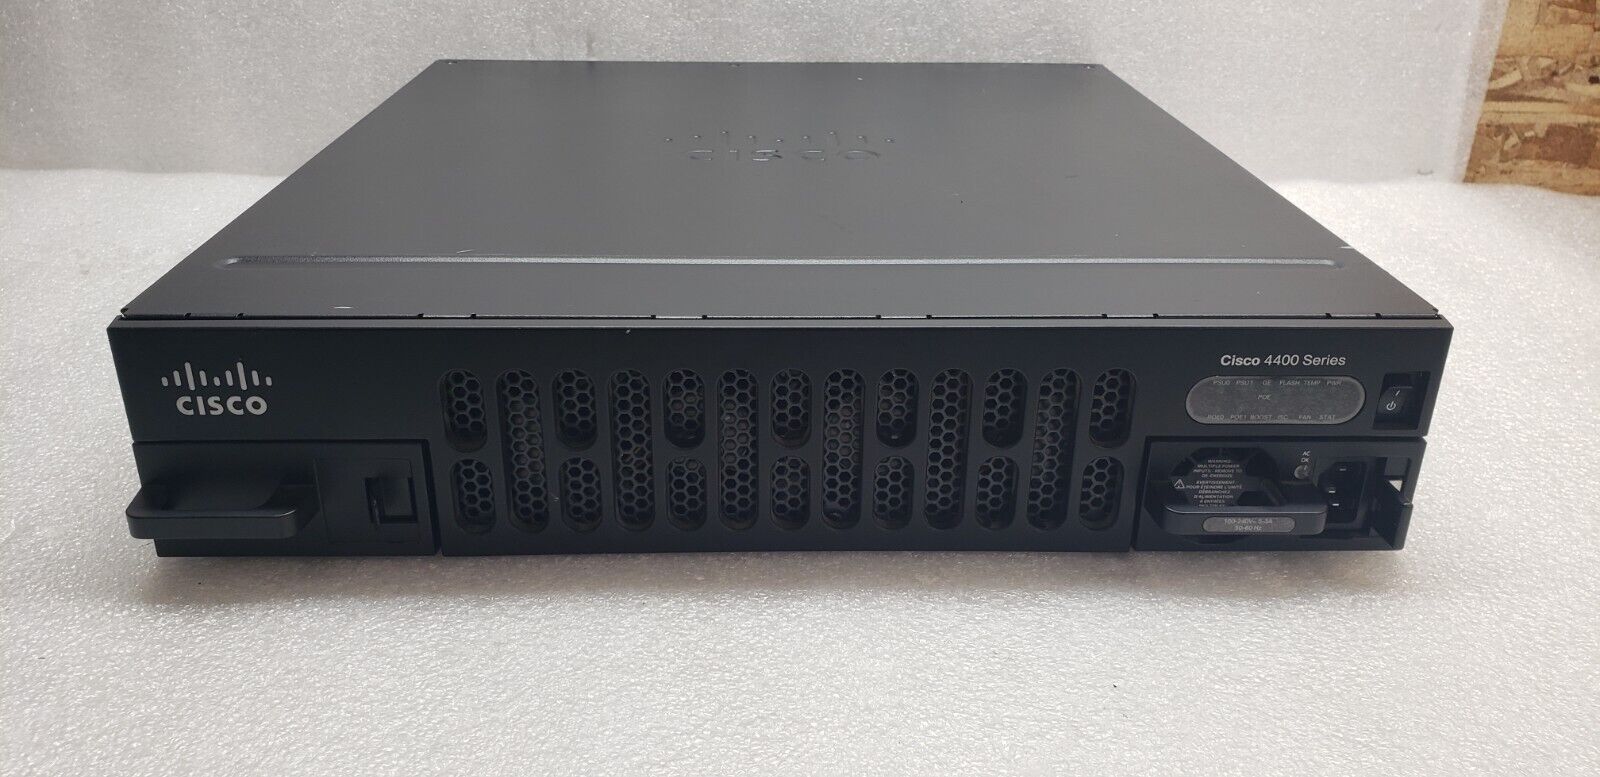 Cisco ISR 4400 Series Integrated Service Router 4-Port PoE ISR4451-X/K9 (2) #99